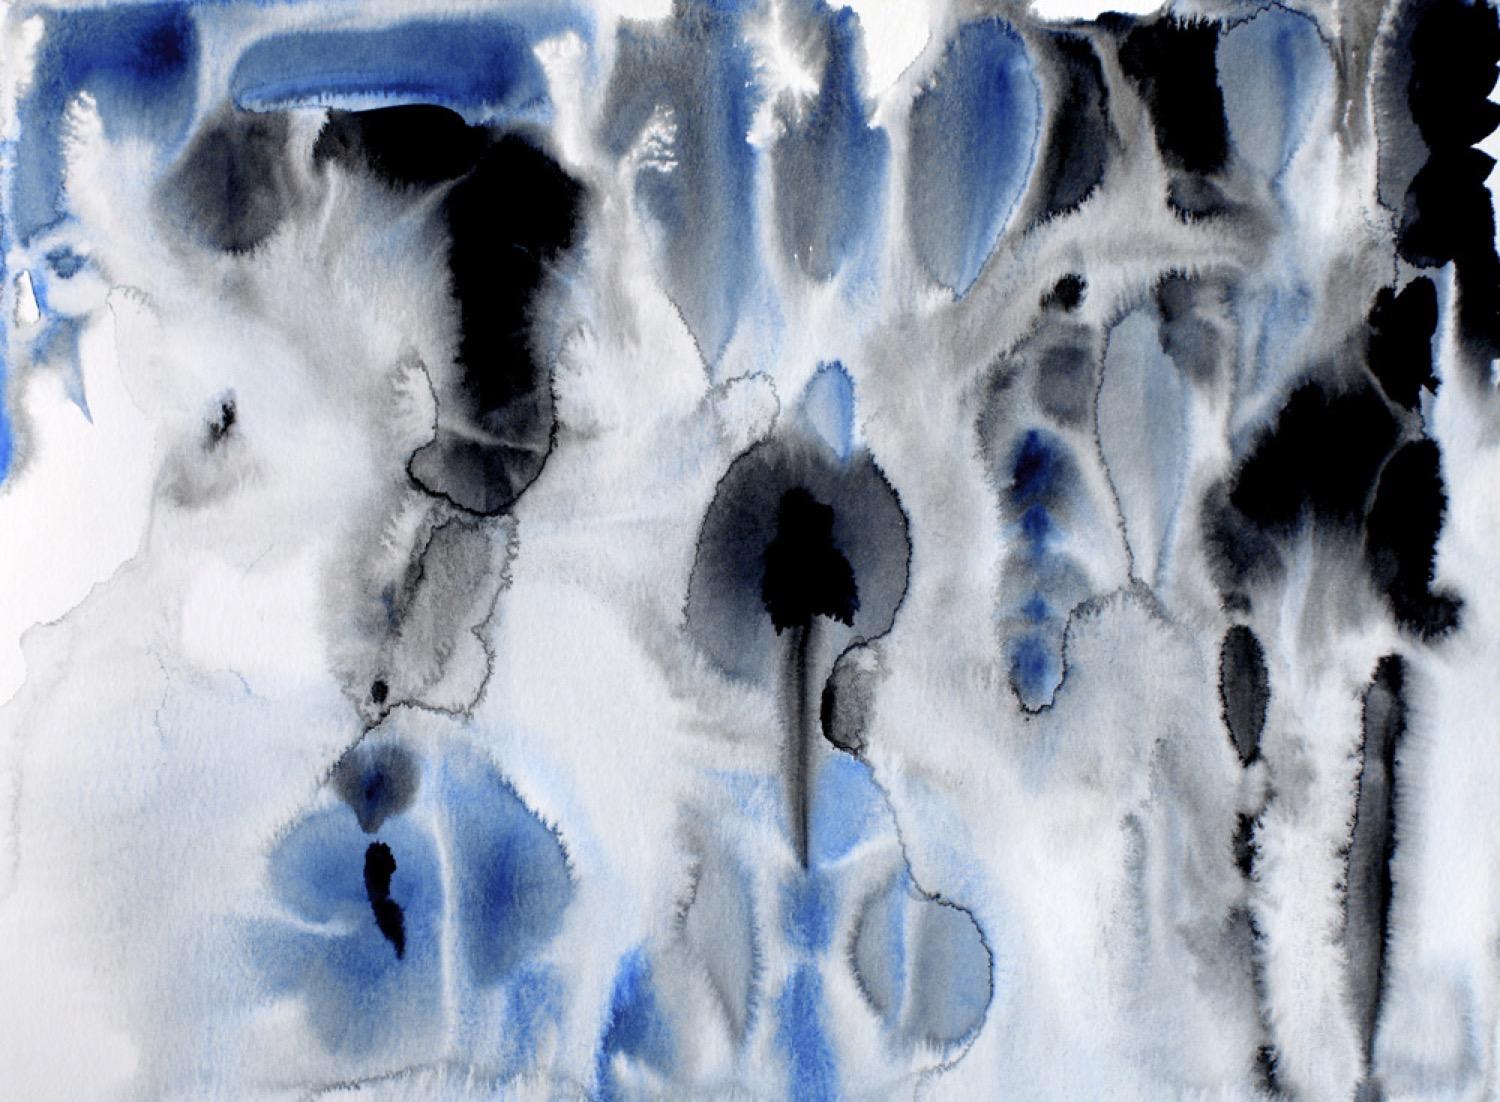 Irena Orlov Abstract Painting - Blue Black Watercolor Abstract Hand Textured Giclee on Canvas, 40 x 60"